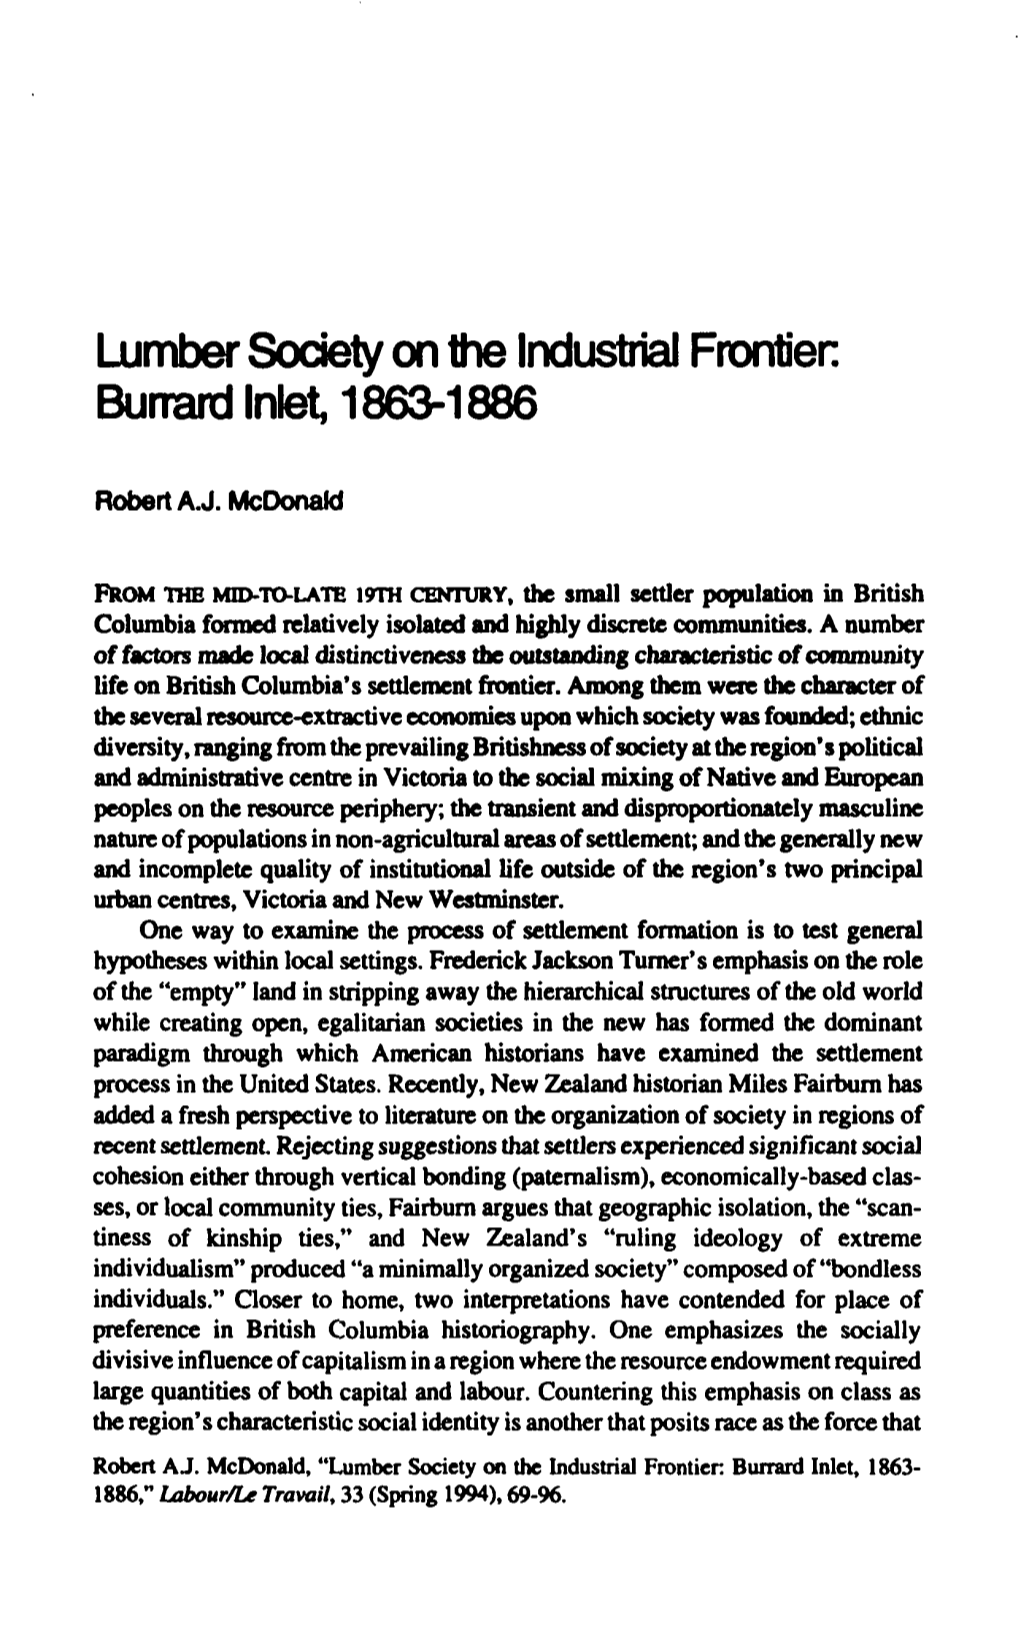 Lumber Society on the Industrial Frontier. Burrard Inlet 1863-1886